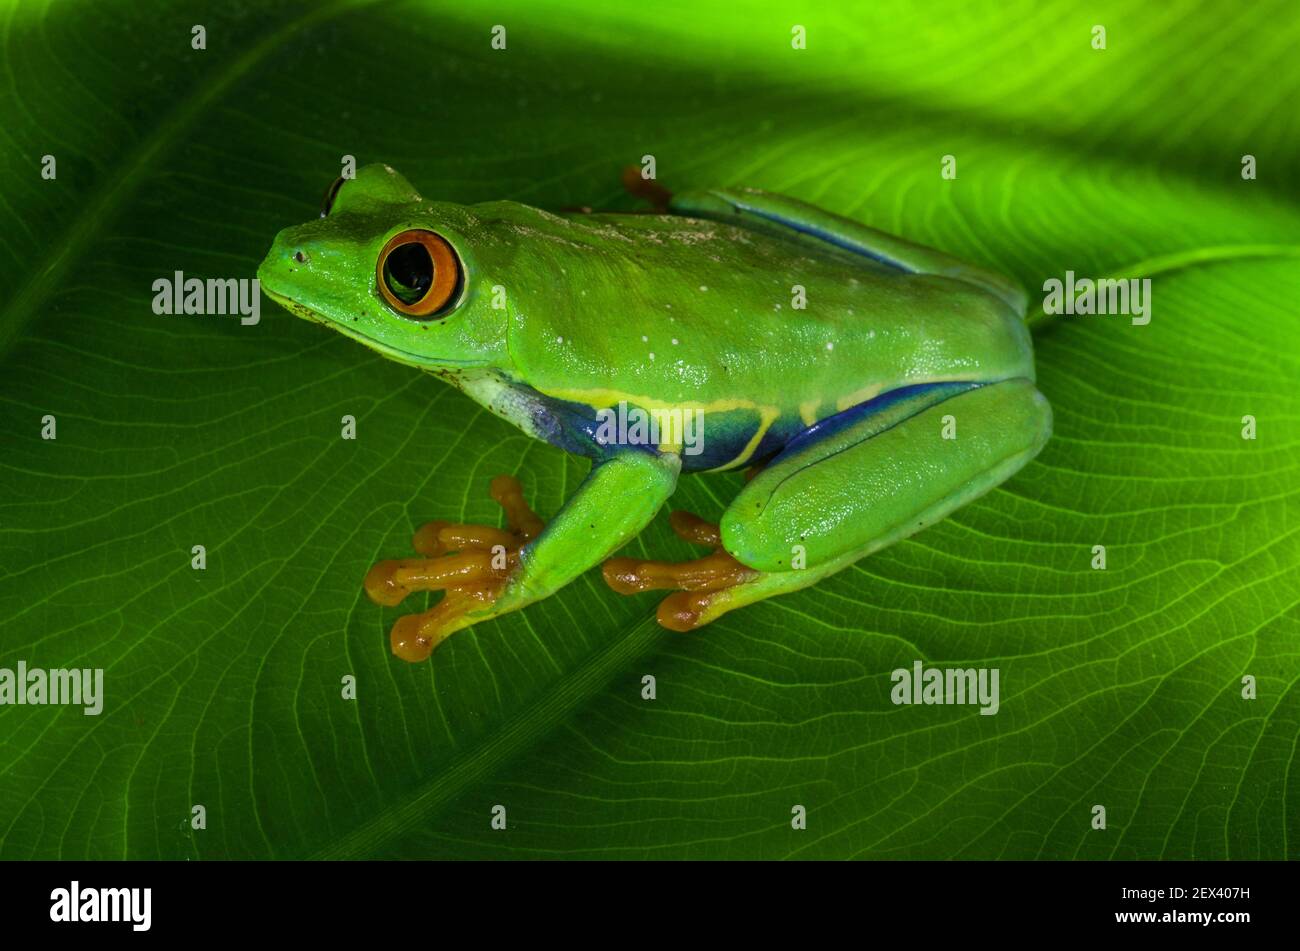 Red Eyed Tree Frog (Agalychnis callidryas) on a leaf, Costa Rica. Stock Photo